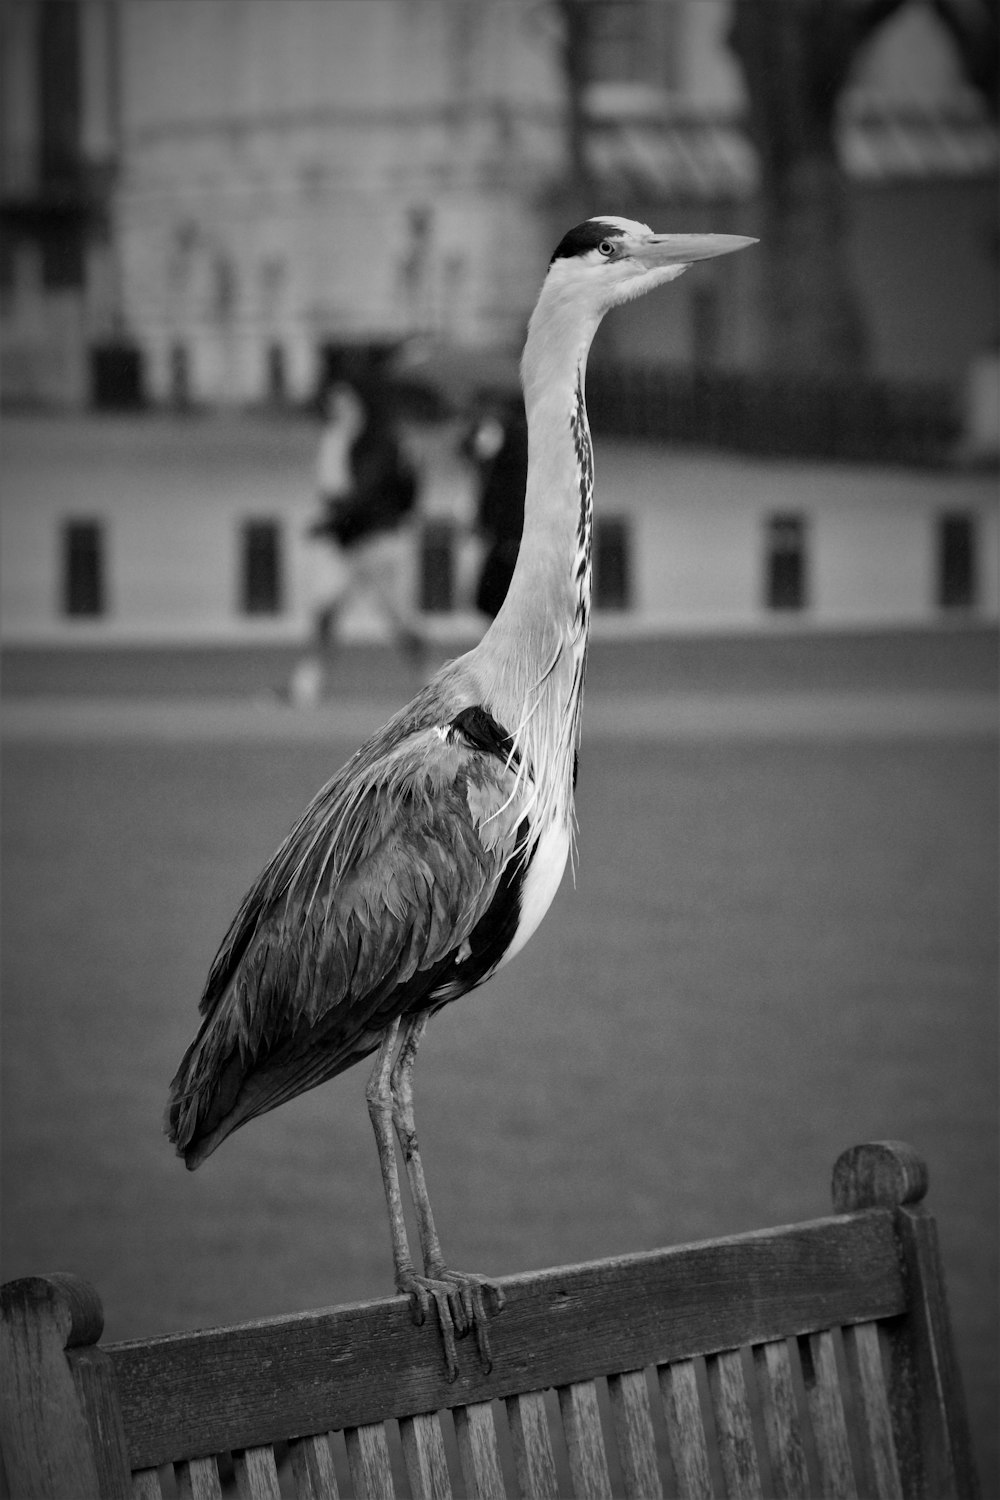 grayscale photo of bird standing on wooden chair